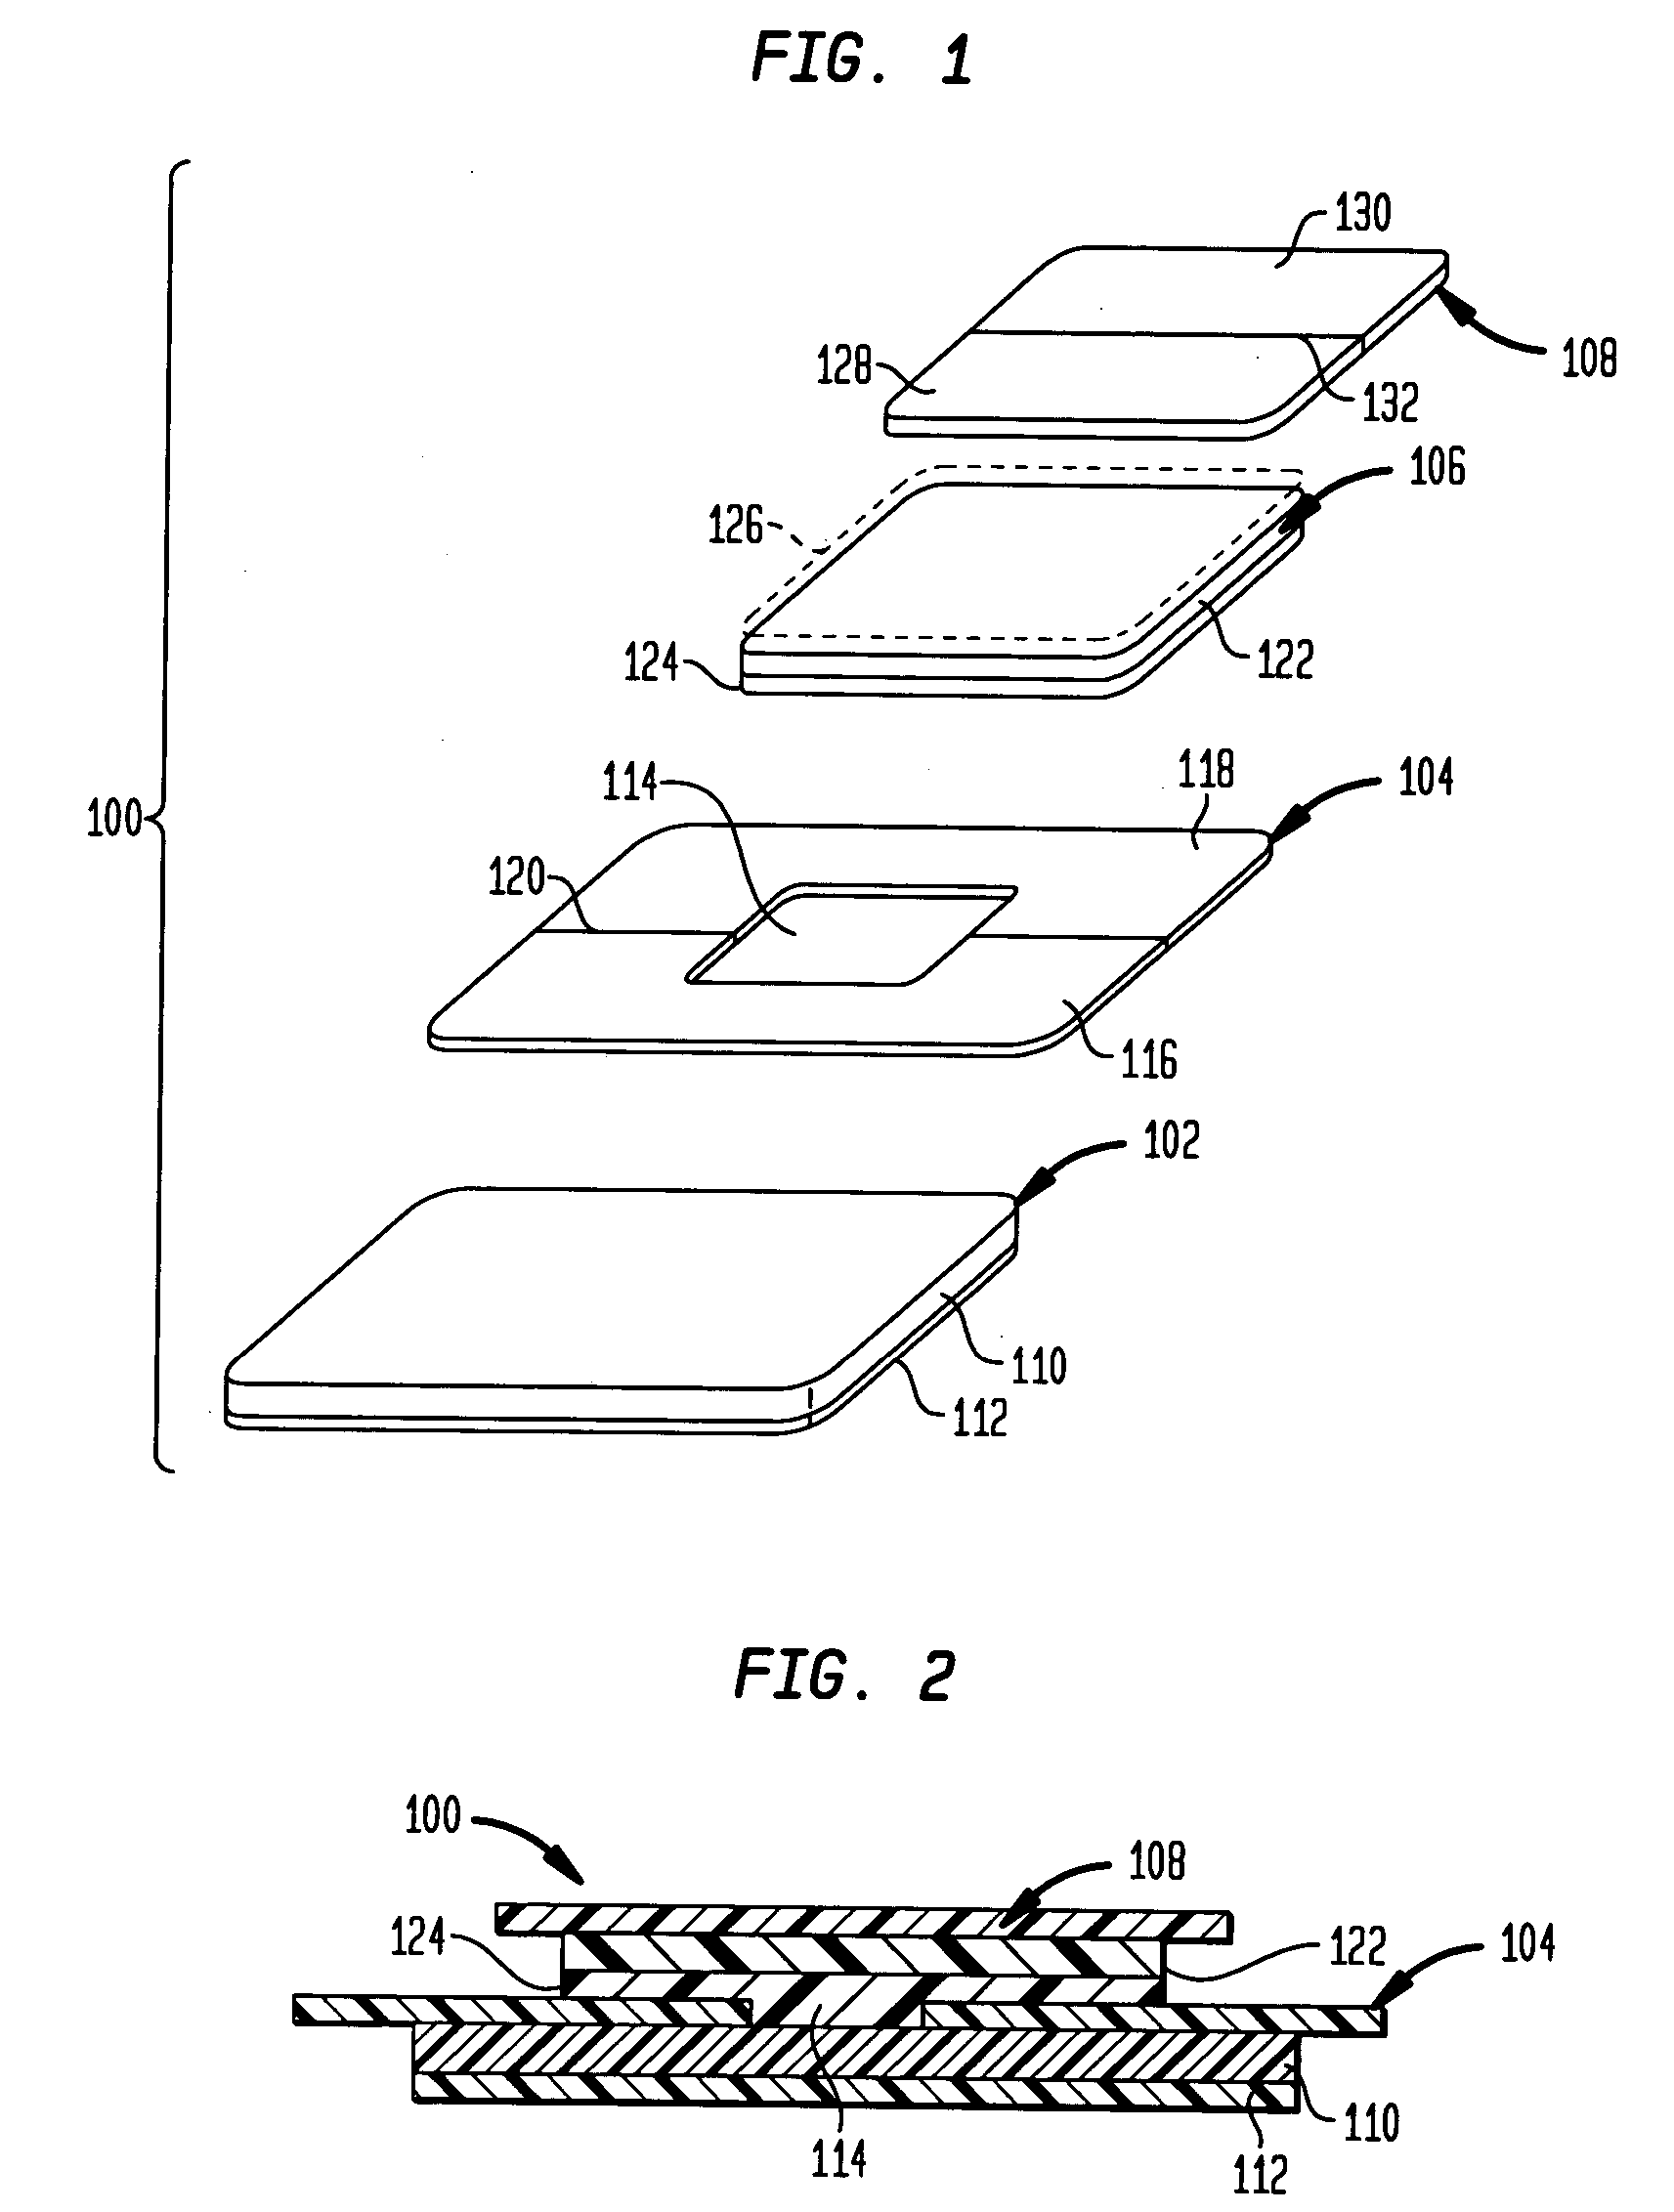 Transdermal patch incorporating active agent migration barrier layer